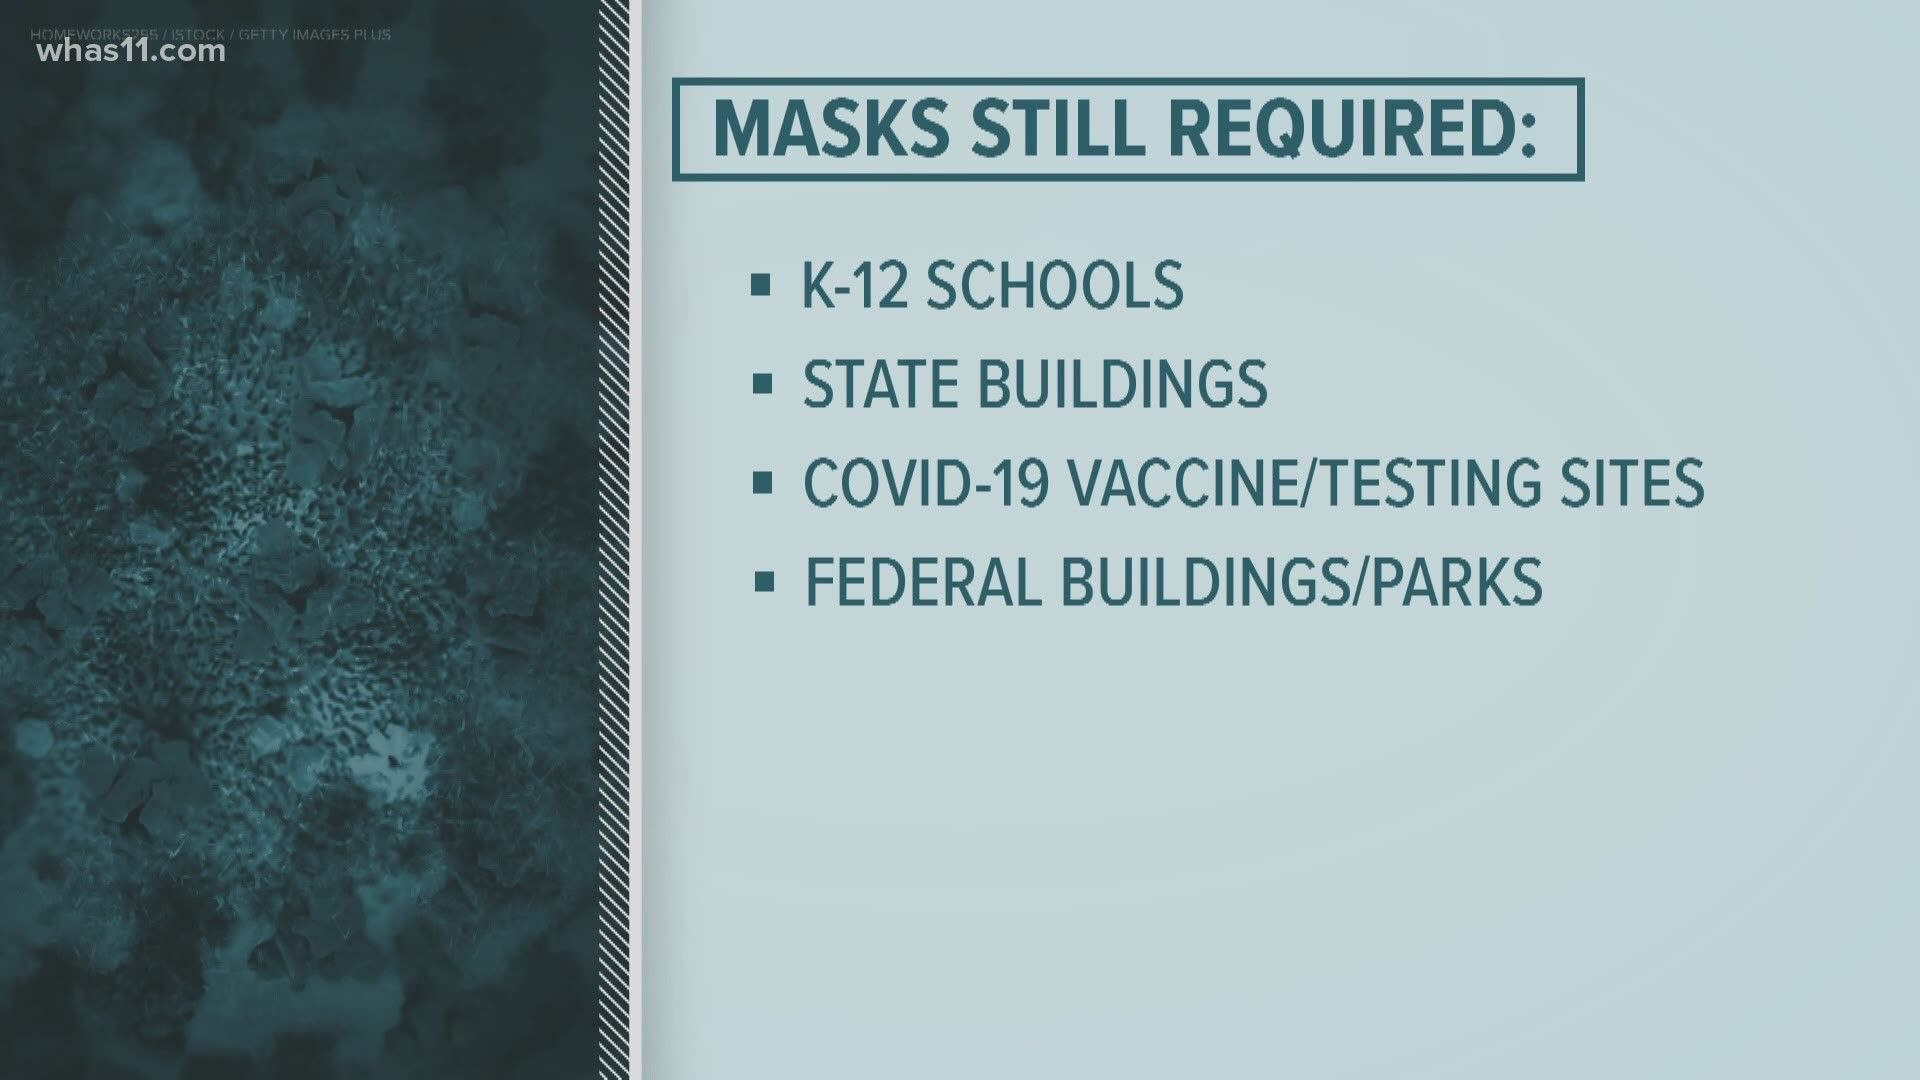 Masks will still be required in K-12 schools, all state buildings and COVID-19 vaccine and testing sites.